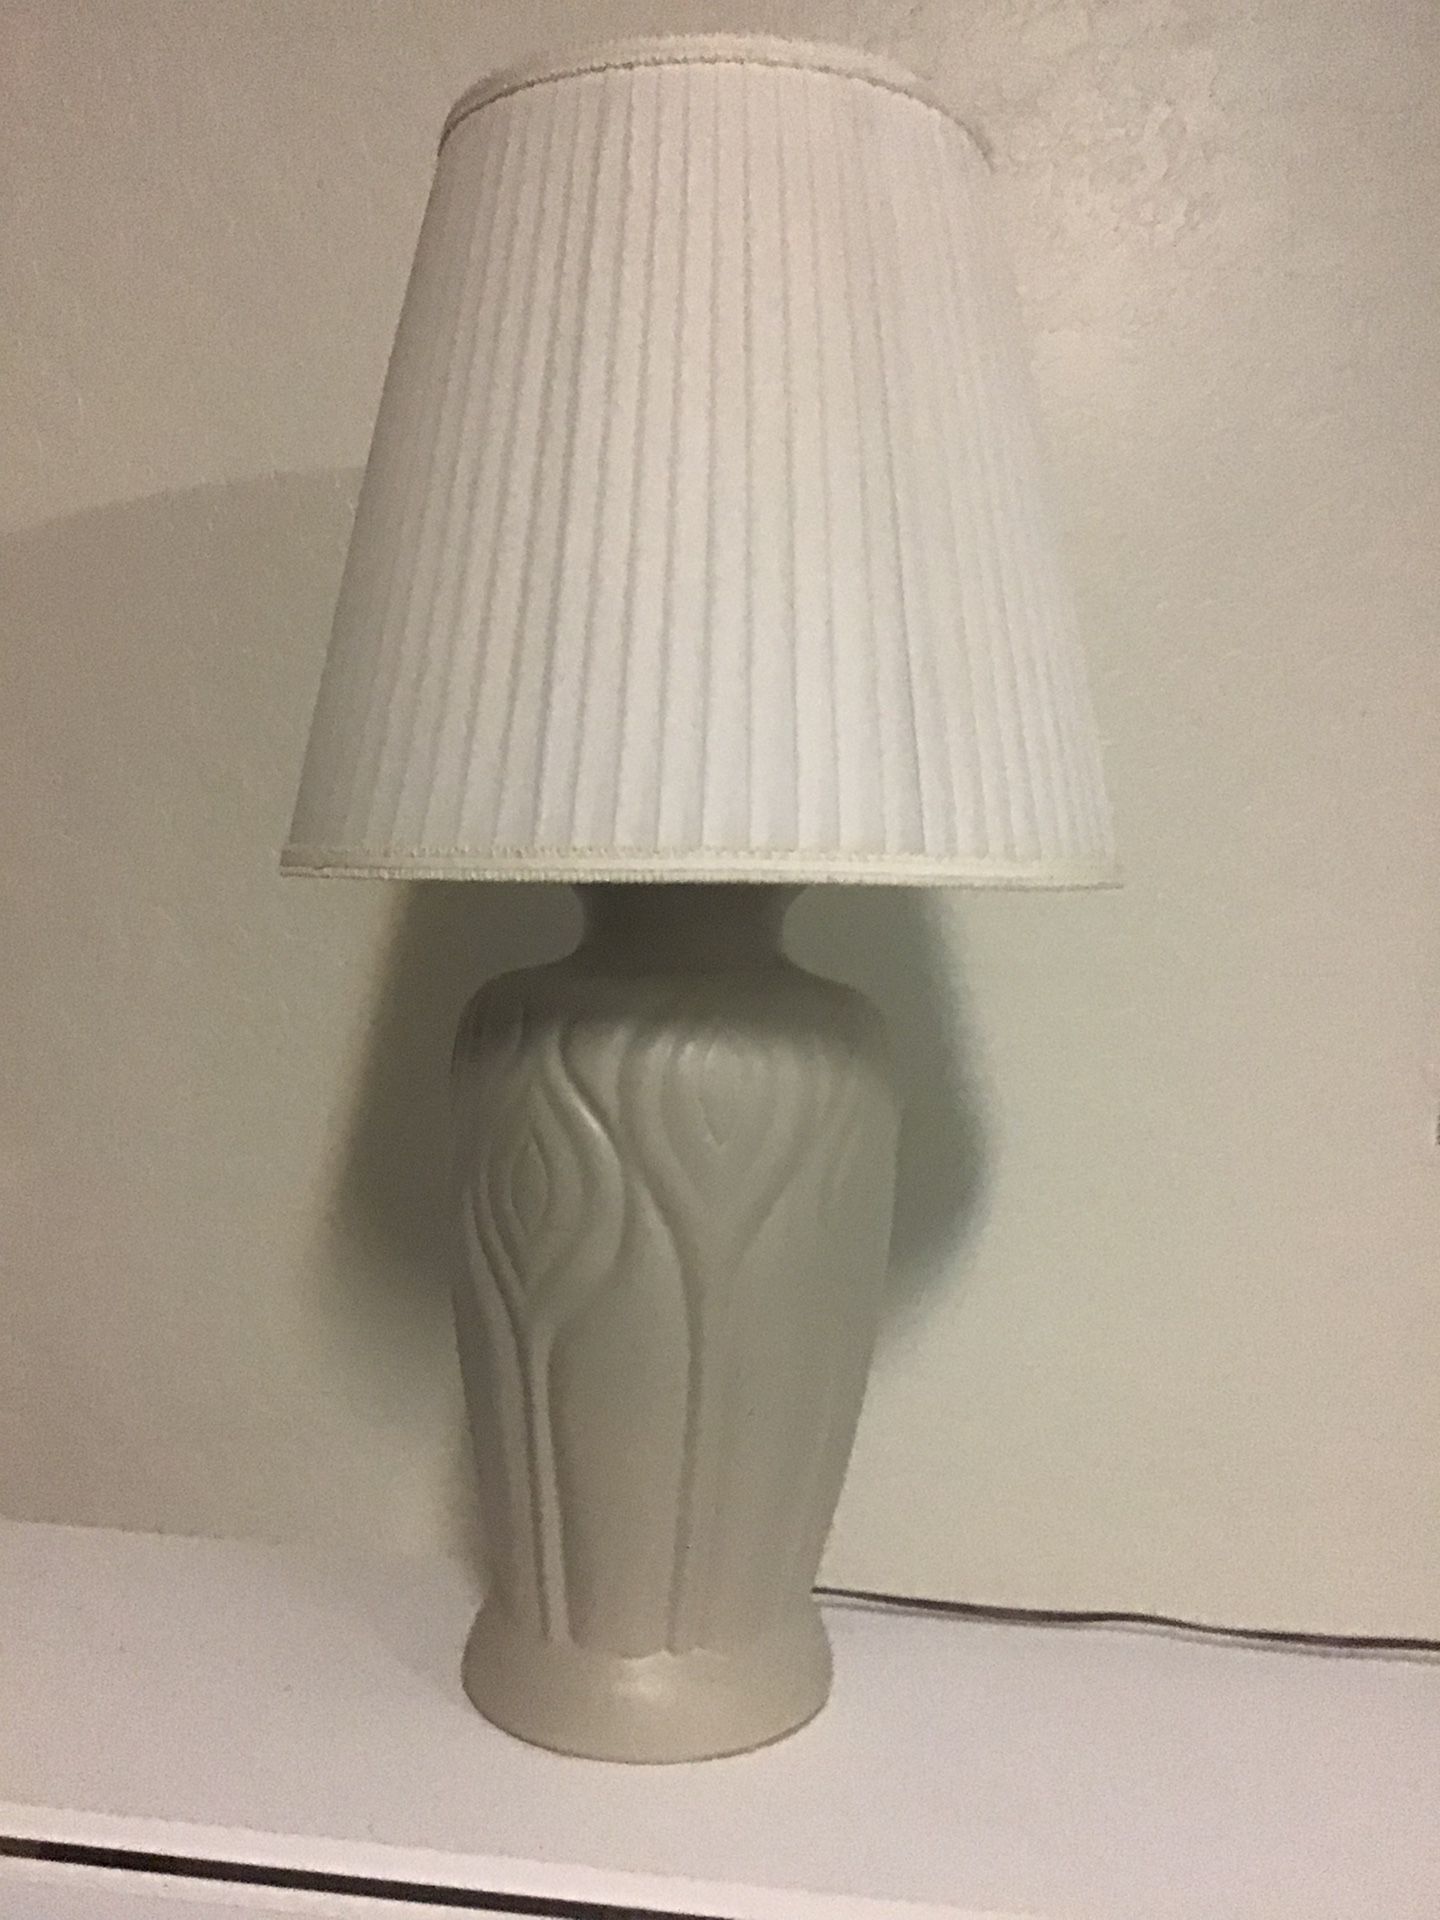 Pottery table lamp